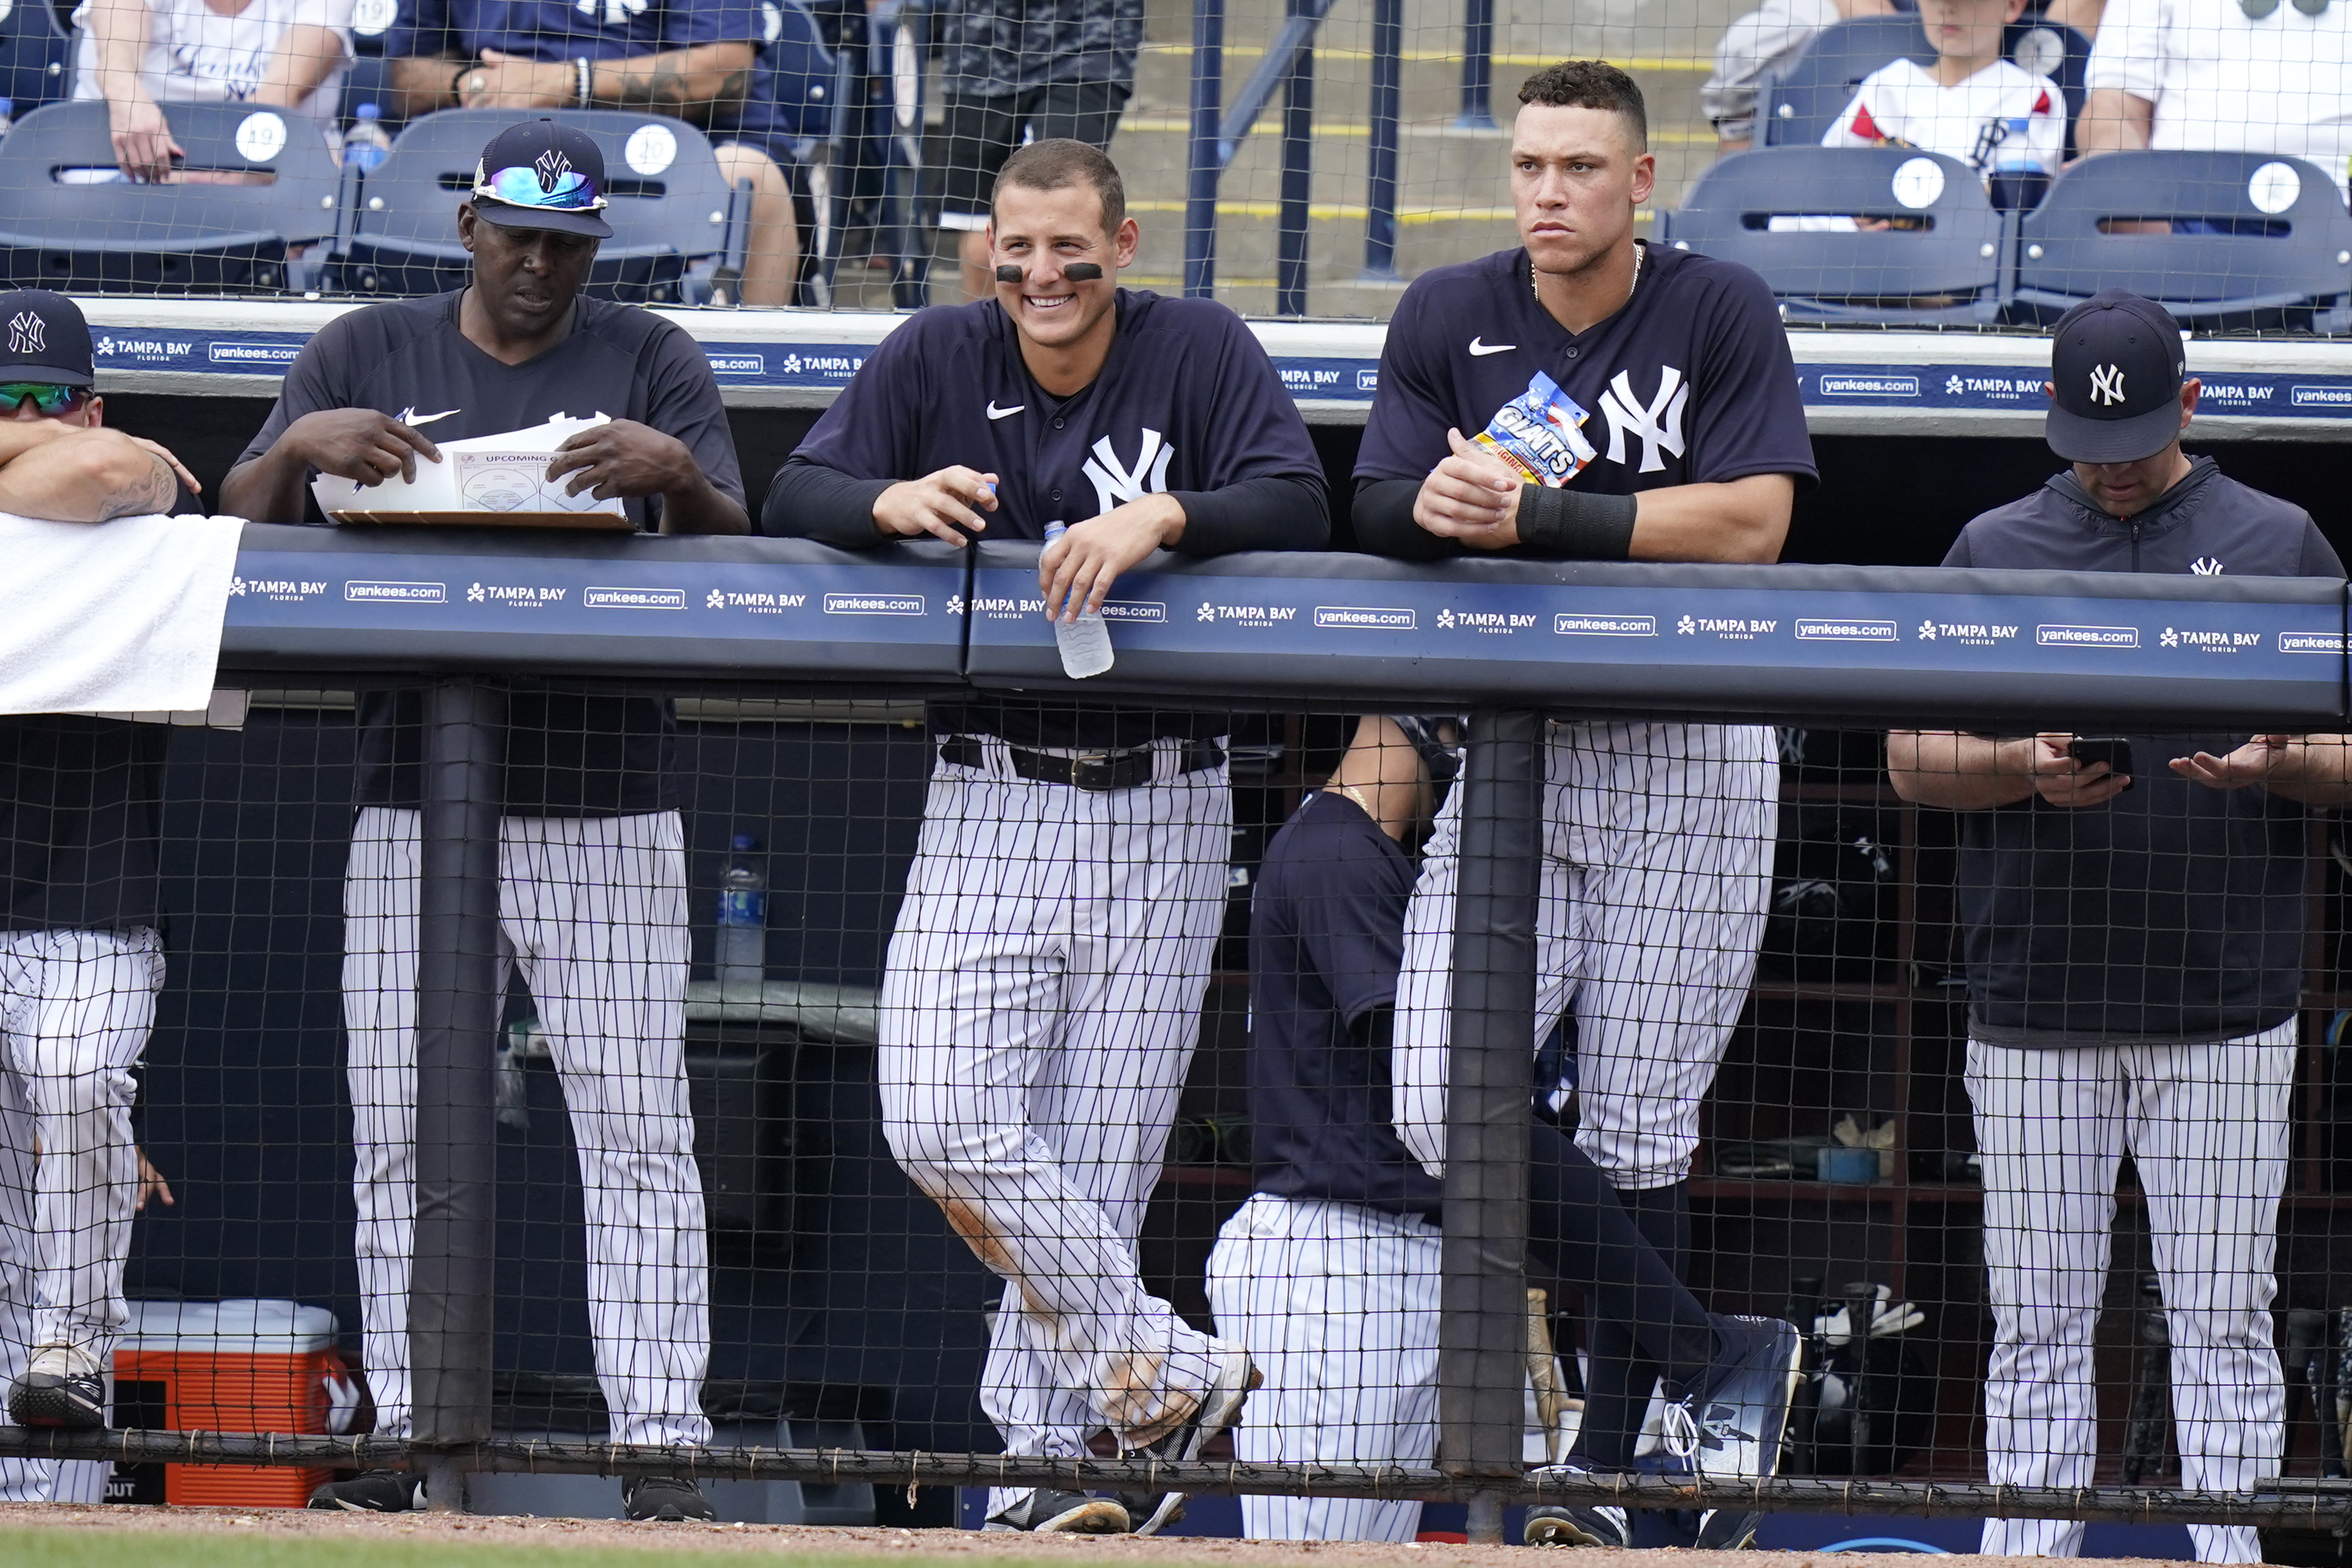 Yankees offered Aaron Judge massive contract extension, MLB insider says